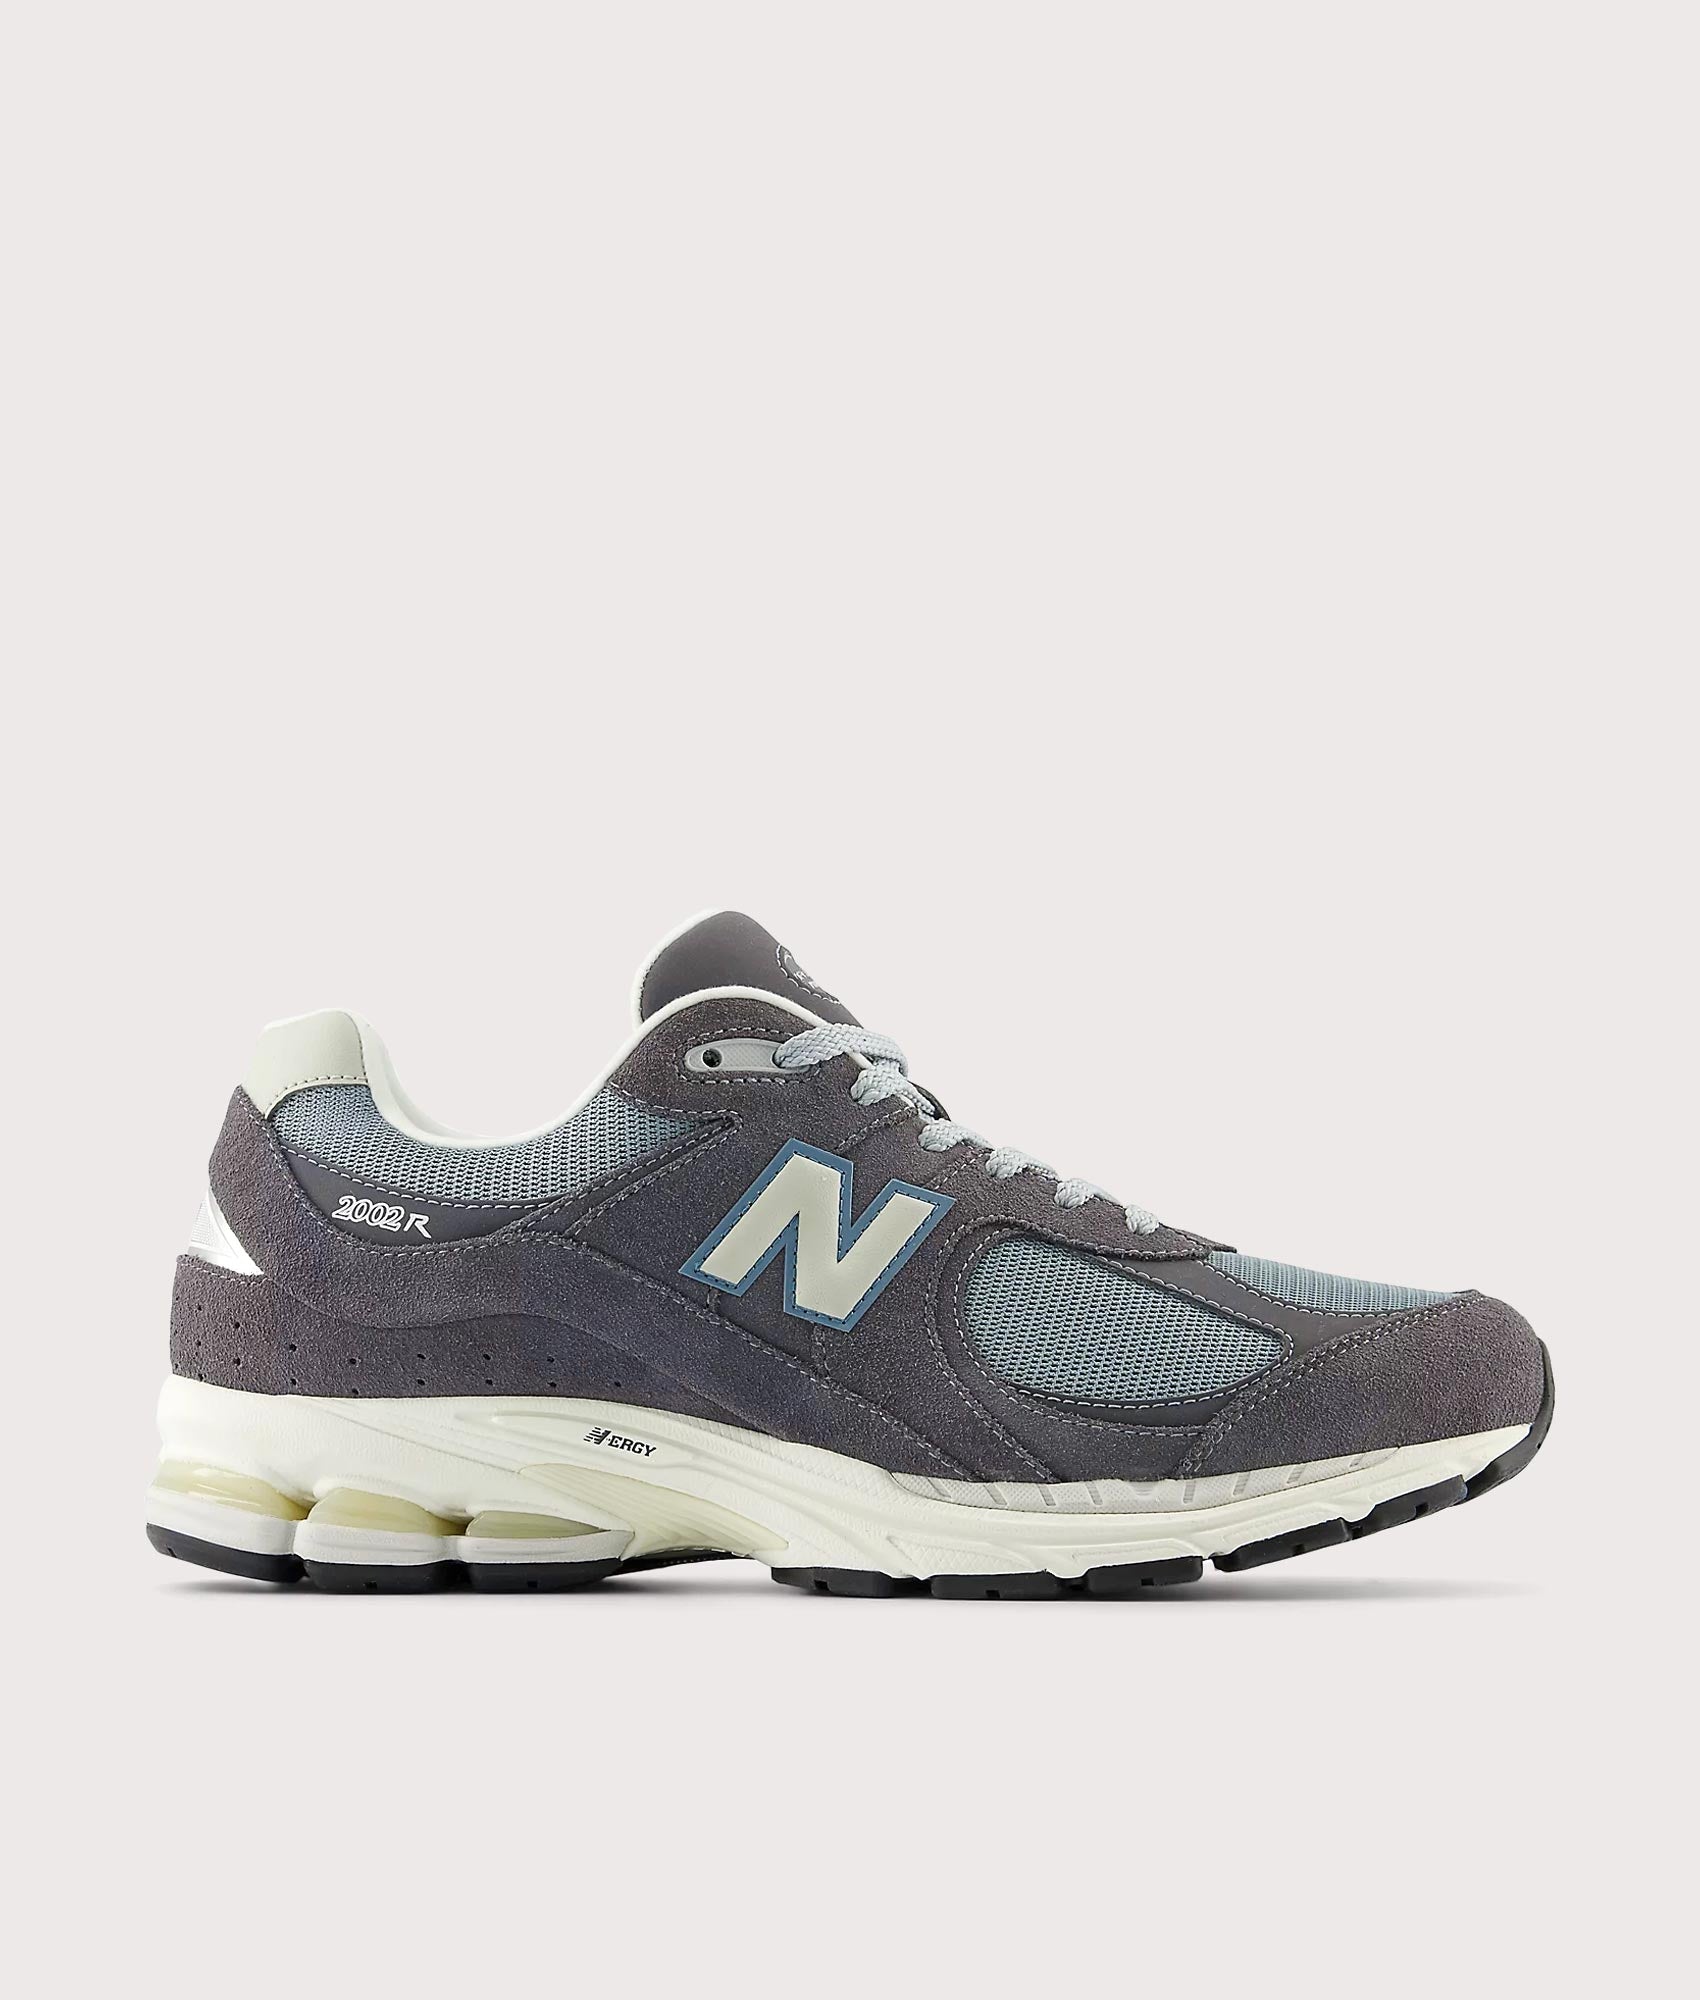 New Balance Mens 2002R Sneakers - Colour: M2002RFB Magnet - Size: 11.5